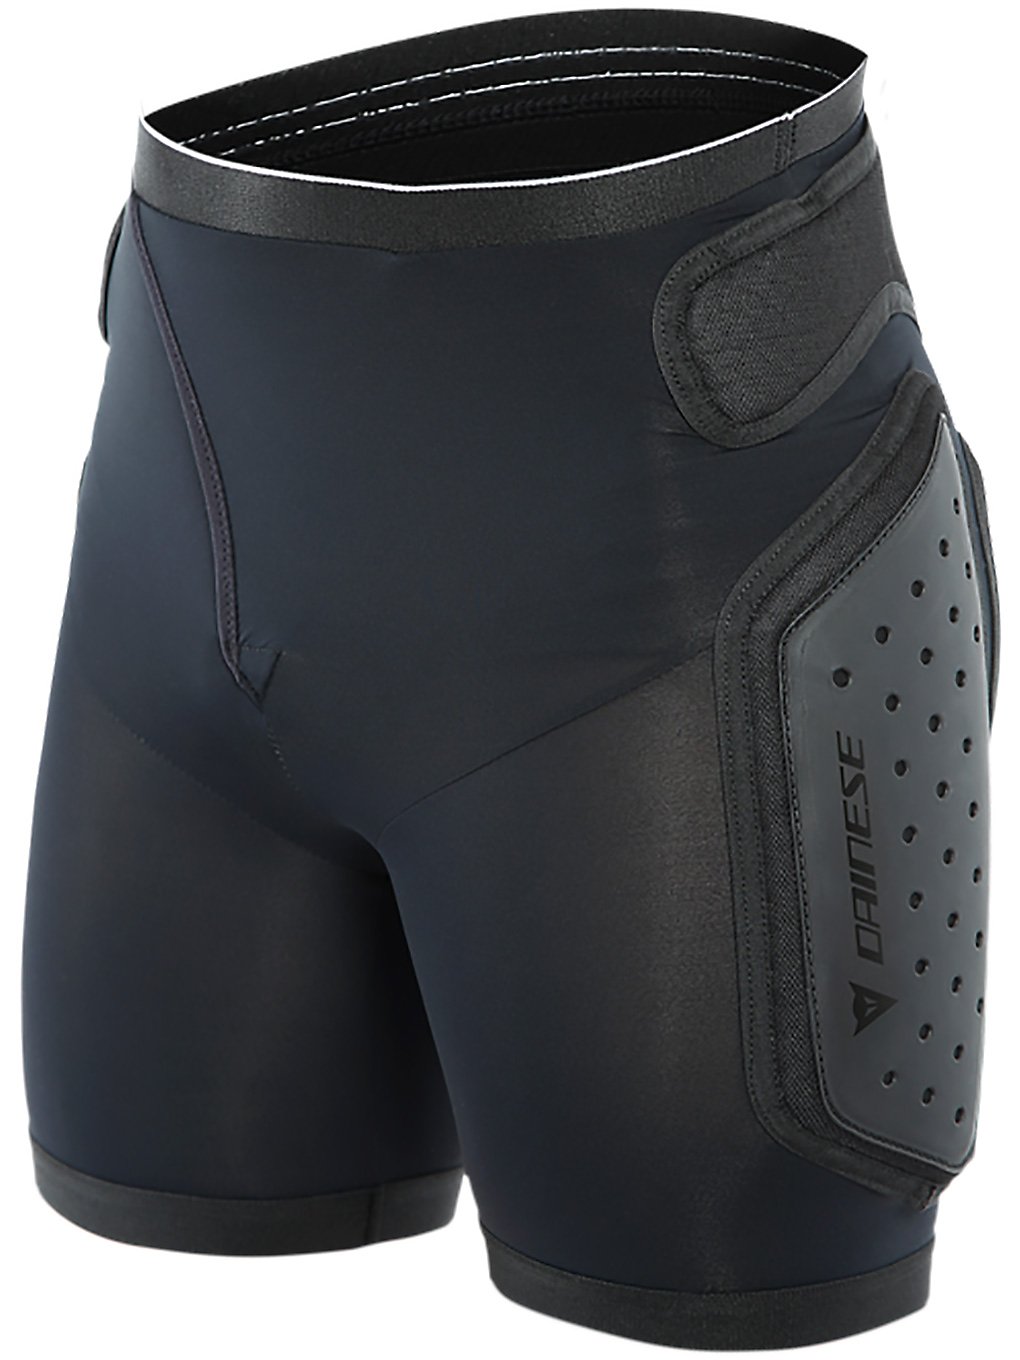 Dainese Action Evo Protection Pants noir